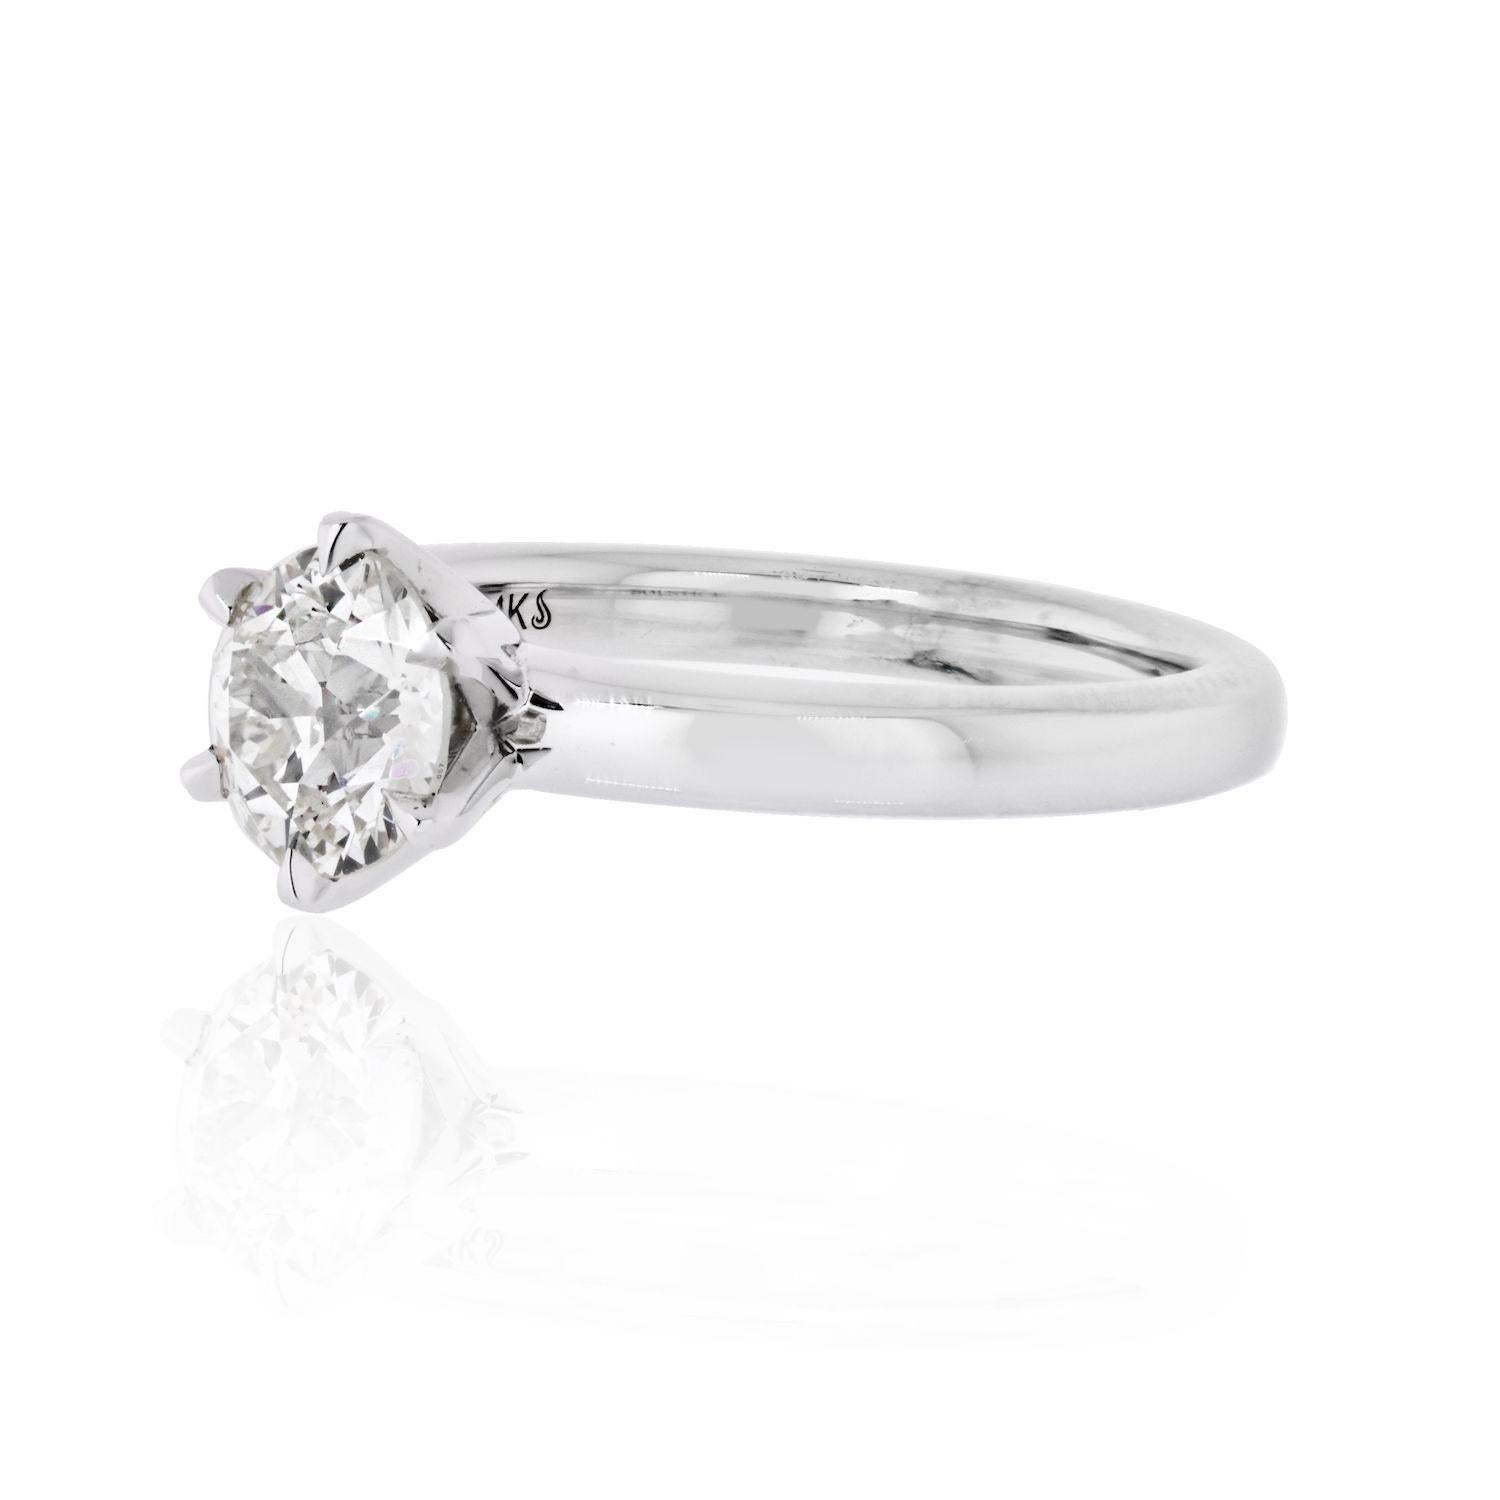 This solitaire style engagement ring is the perfect marriage of modern and vintage. It features a 1.28 carat Old European Cut diamond in a modern 14 karat, 2.5mm wide white gold setting. The diamond, has L color and SI2 clarity certified by GIA and